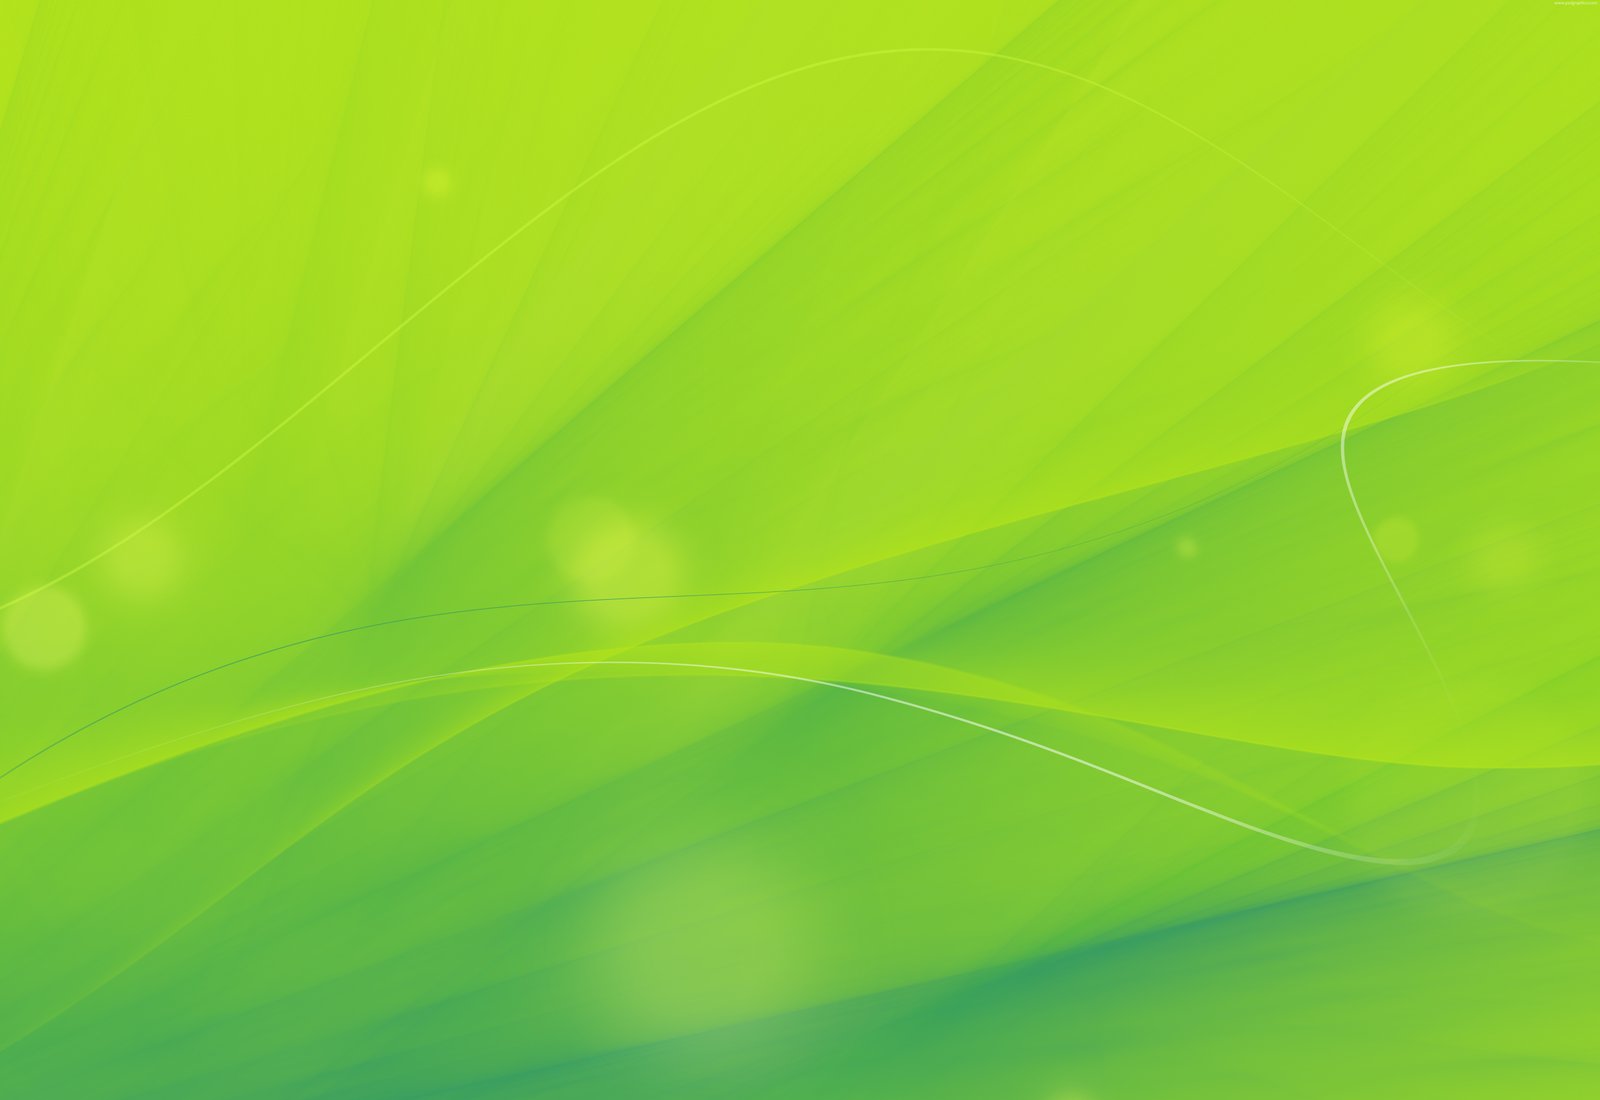 47+ View Artistic Lime Green Background Images - Cool Background Collection